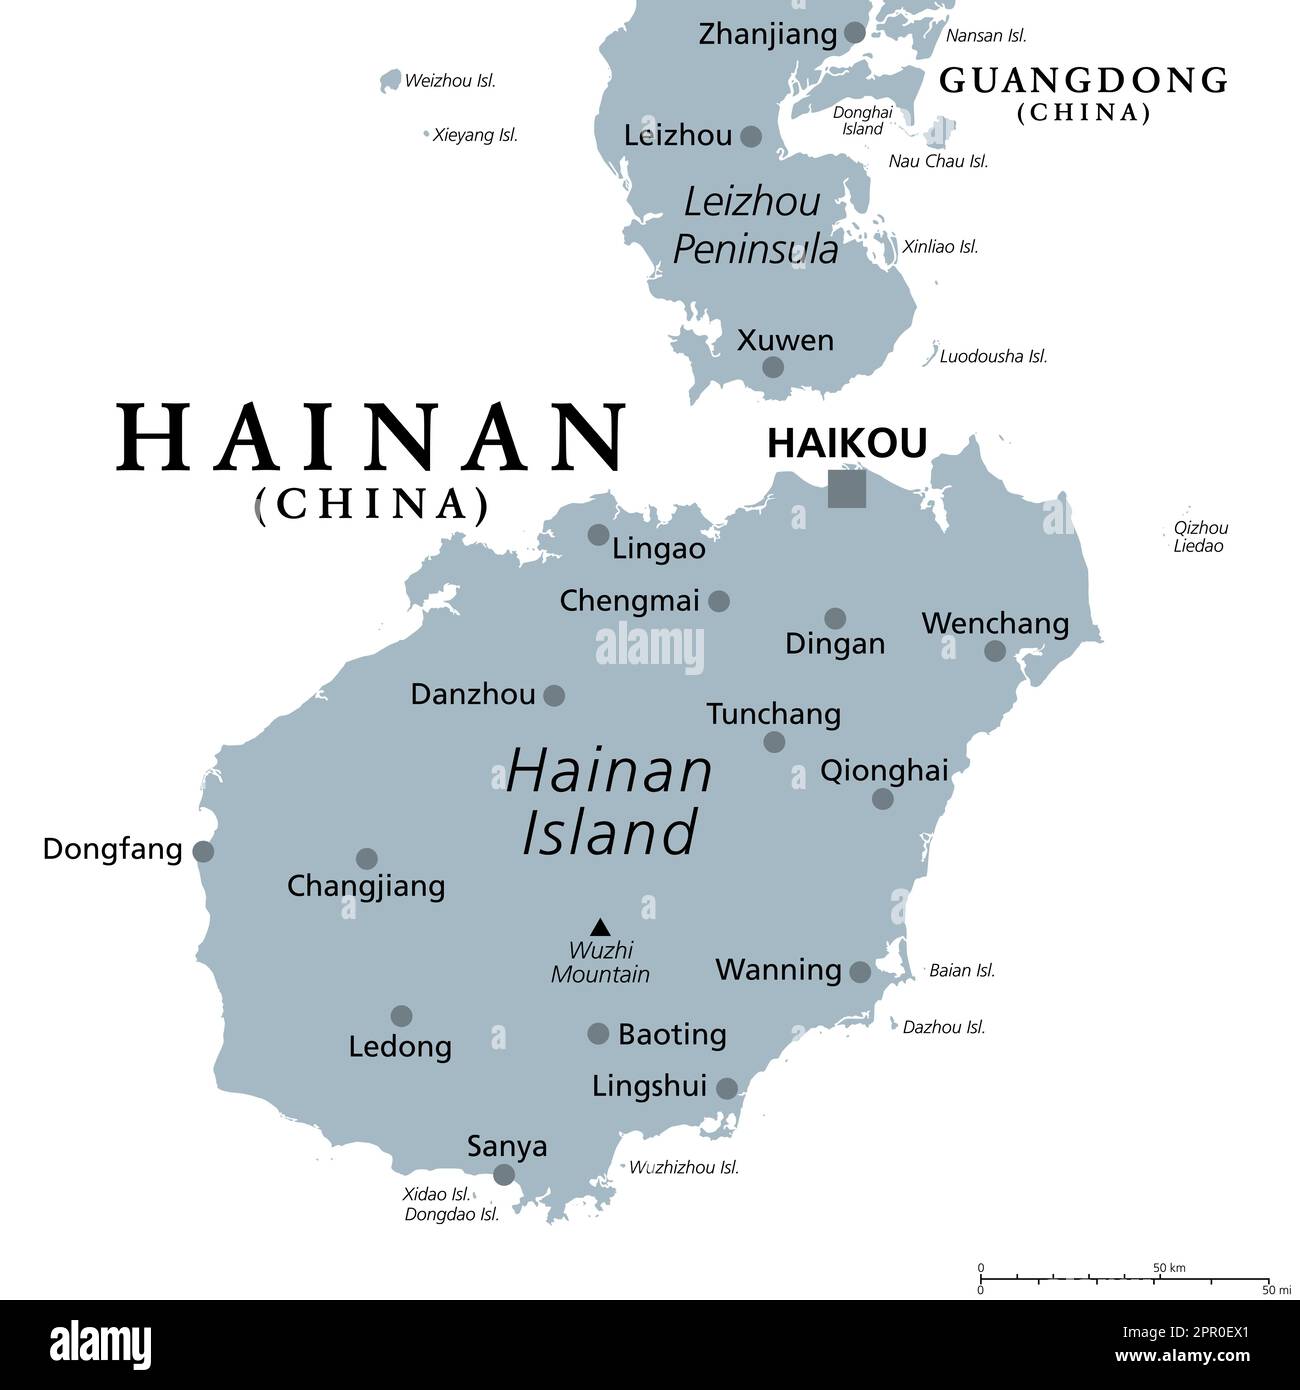 Hainan The Smallest And Southernmost Province Of China Prc Gray Political Map Hainan Island With Capital Haikou And Various Smaller Islands 2PR0EX1 